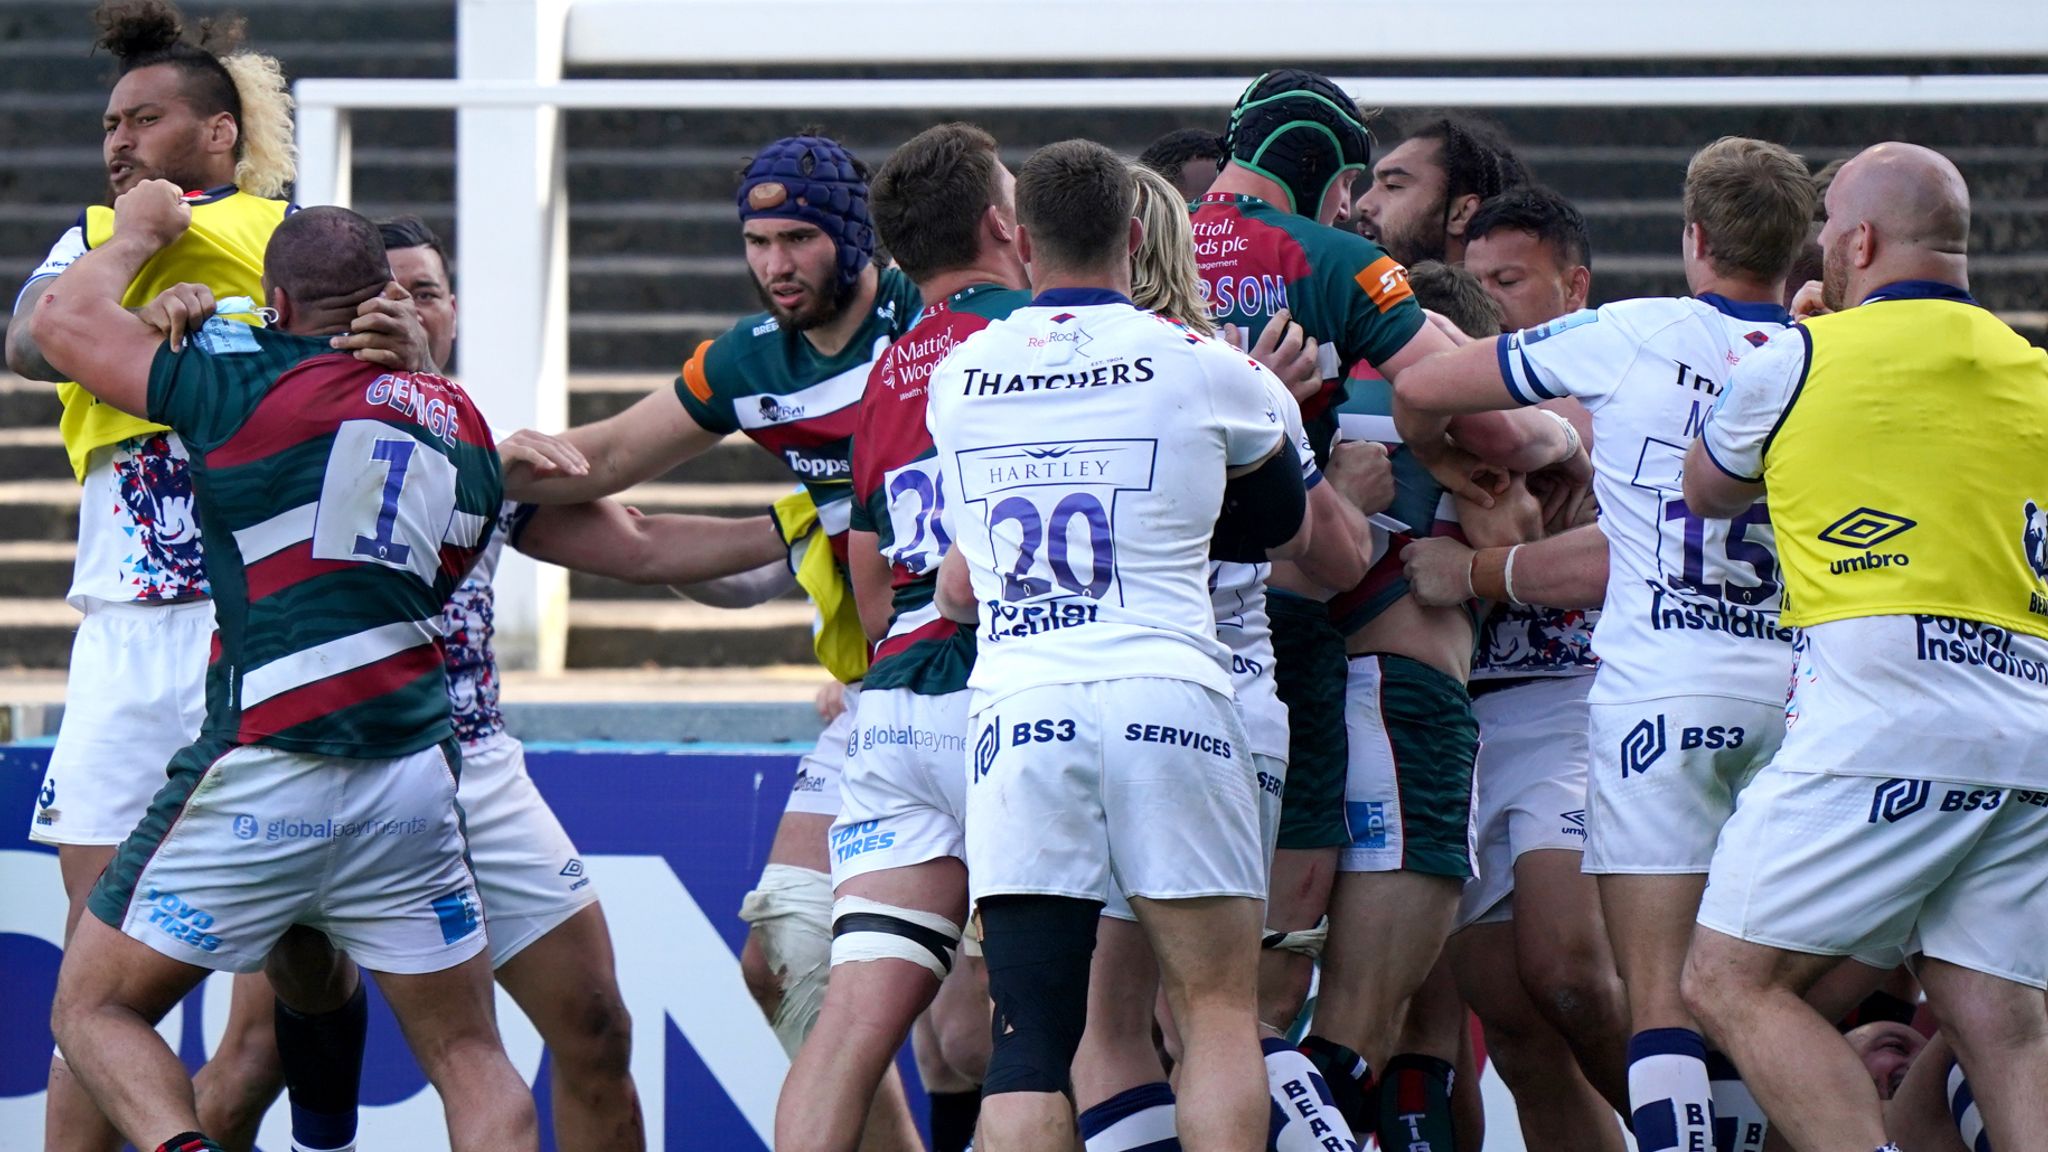 Gallagher Premiership Late chaos as Bristol Bears beat Leicester Tigers while Tom Willis wins it for Wasps Rugby Union News Sky Sports